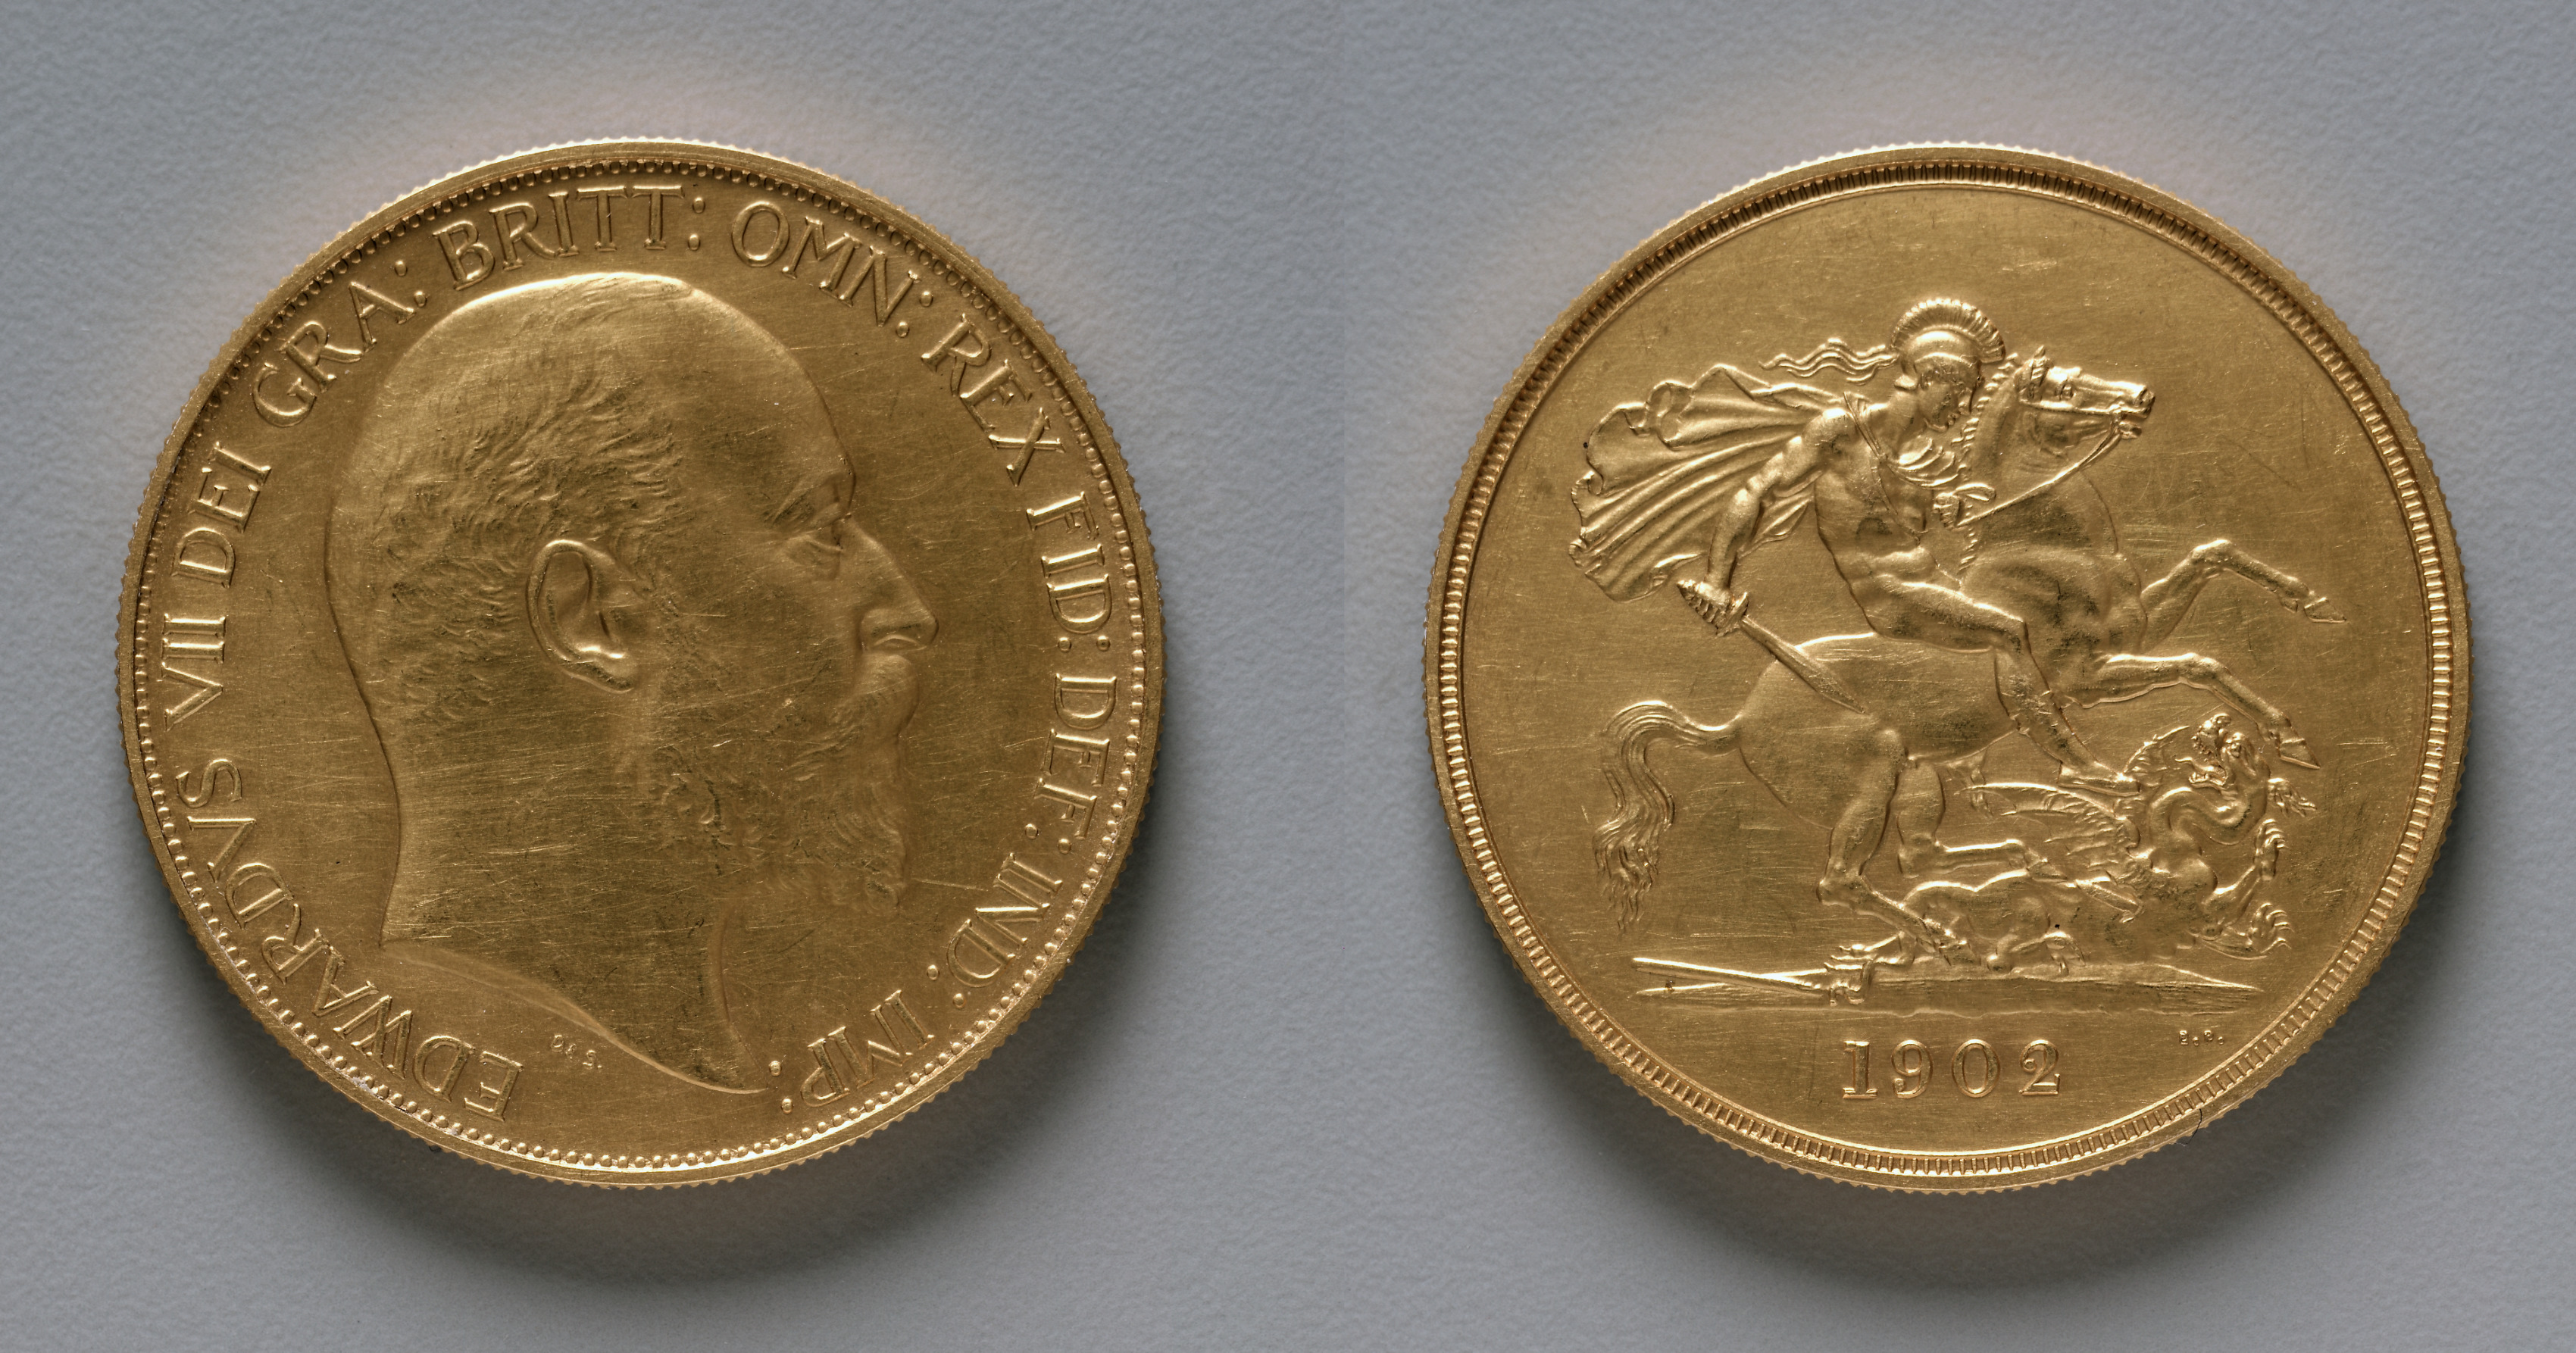 Five Pound Piece: Edward VII (obverse); St. George and the Dragon (reverse)